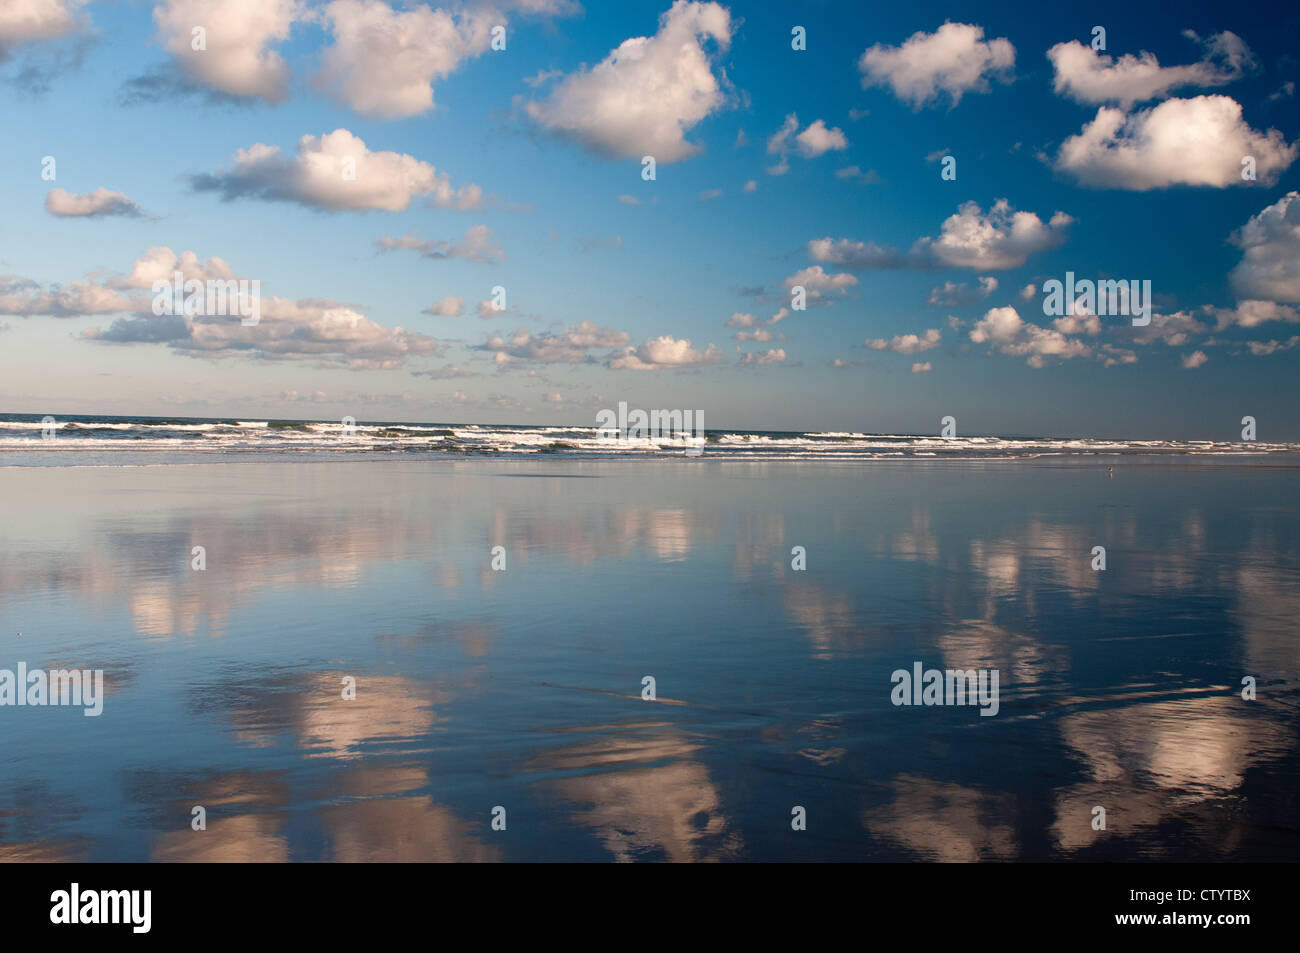 Clouds reflected in water at low tide on Seventy Five Mile Beach, Fraser Island. Stock Photo